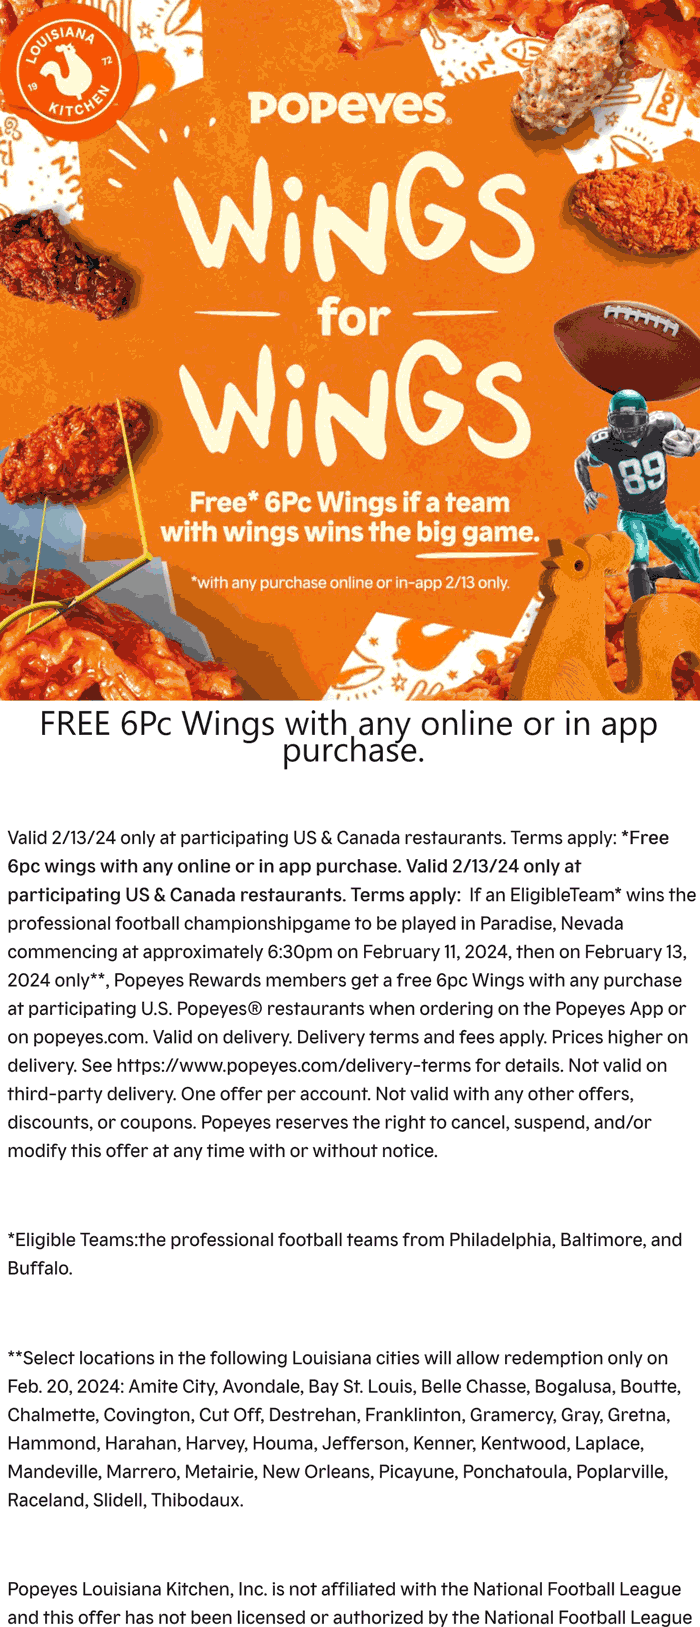 Popeyes restaurants Coupon  Free 6pc chicken wings the 13th if Philly, Baltimore or Buffalo win big game the 11th at Popeyes #popeyes 